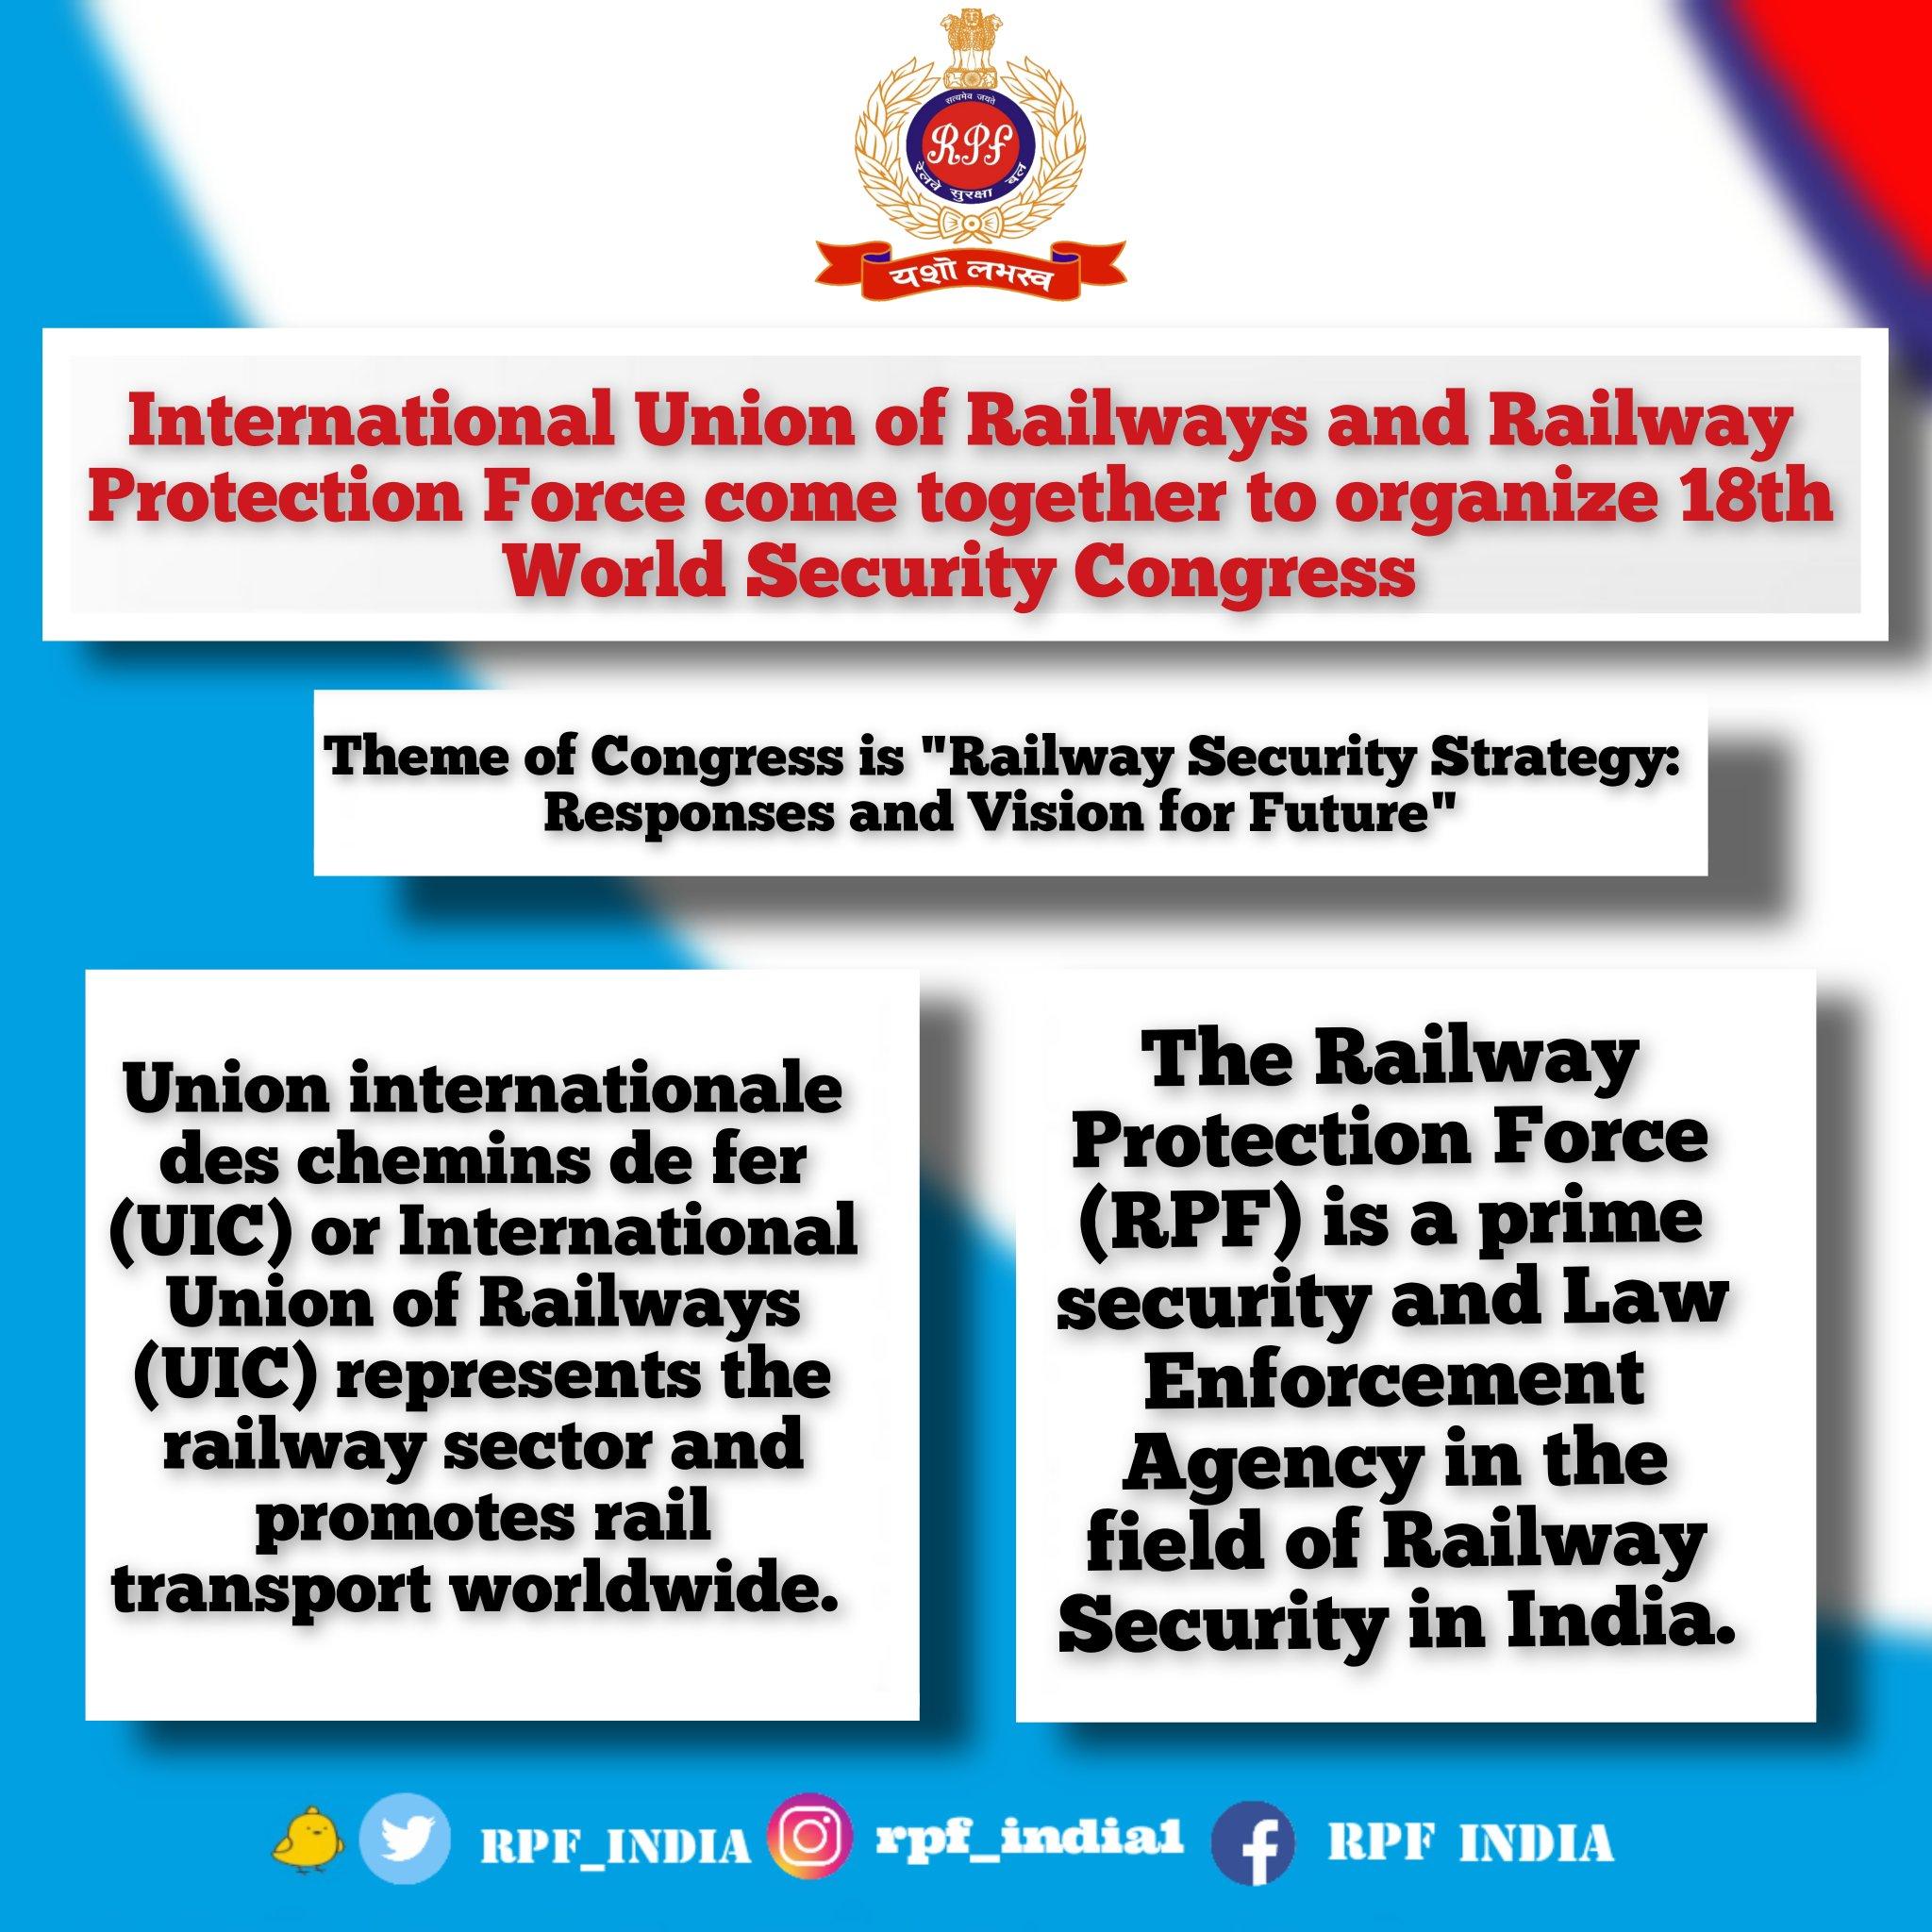 RPF INDIA on Twitter: "With the theme 'Railway Security Strategy:Responses and Vision for Future',@uic and @RPF_INDIA are joining forces for the 18th World Security Congress to discuss the future of #RailwaySecurity strategies.